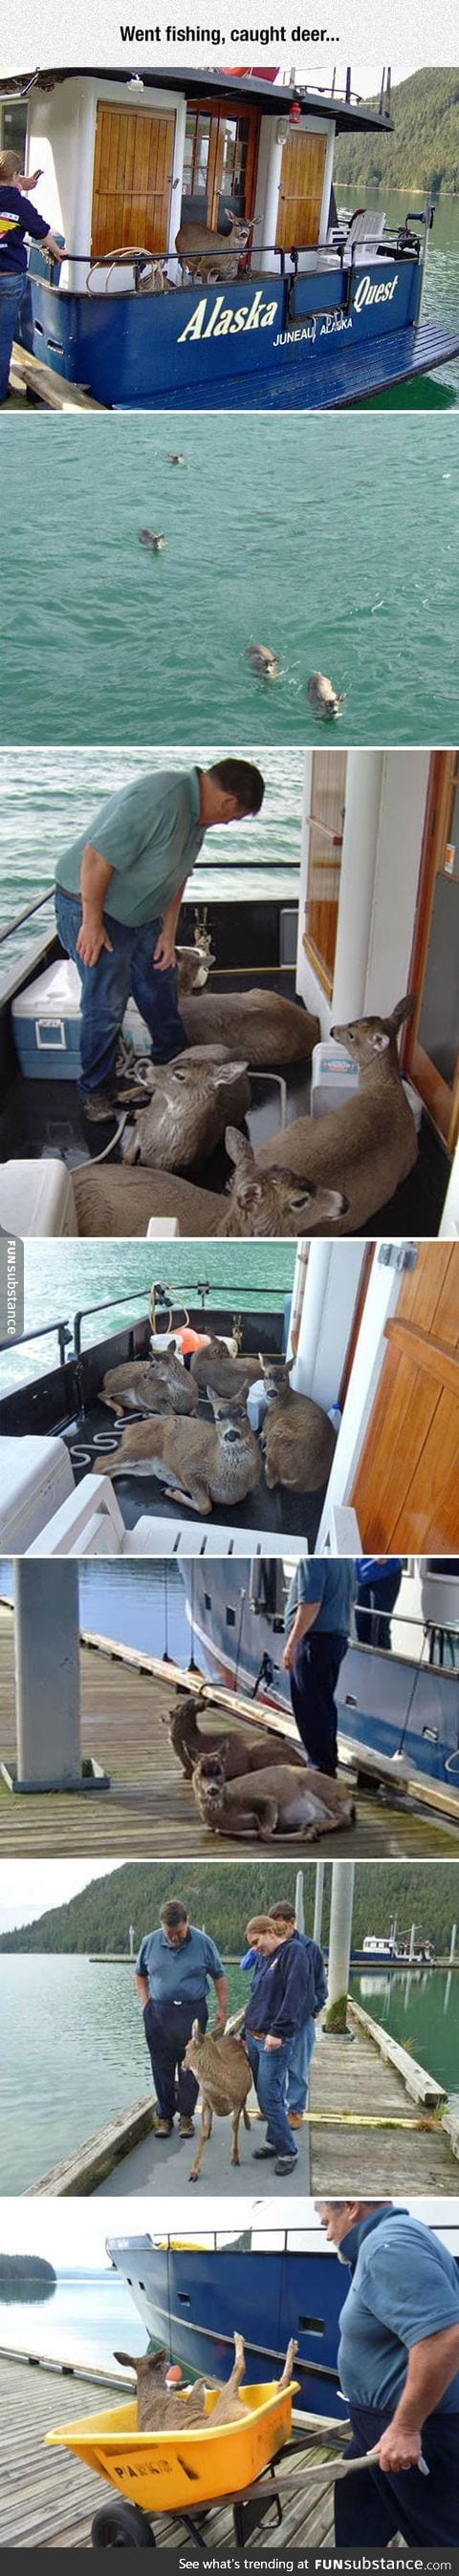 Deer fishing done properly